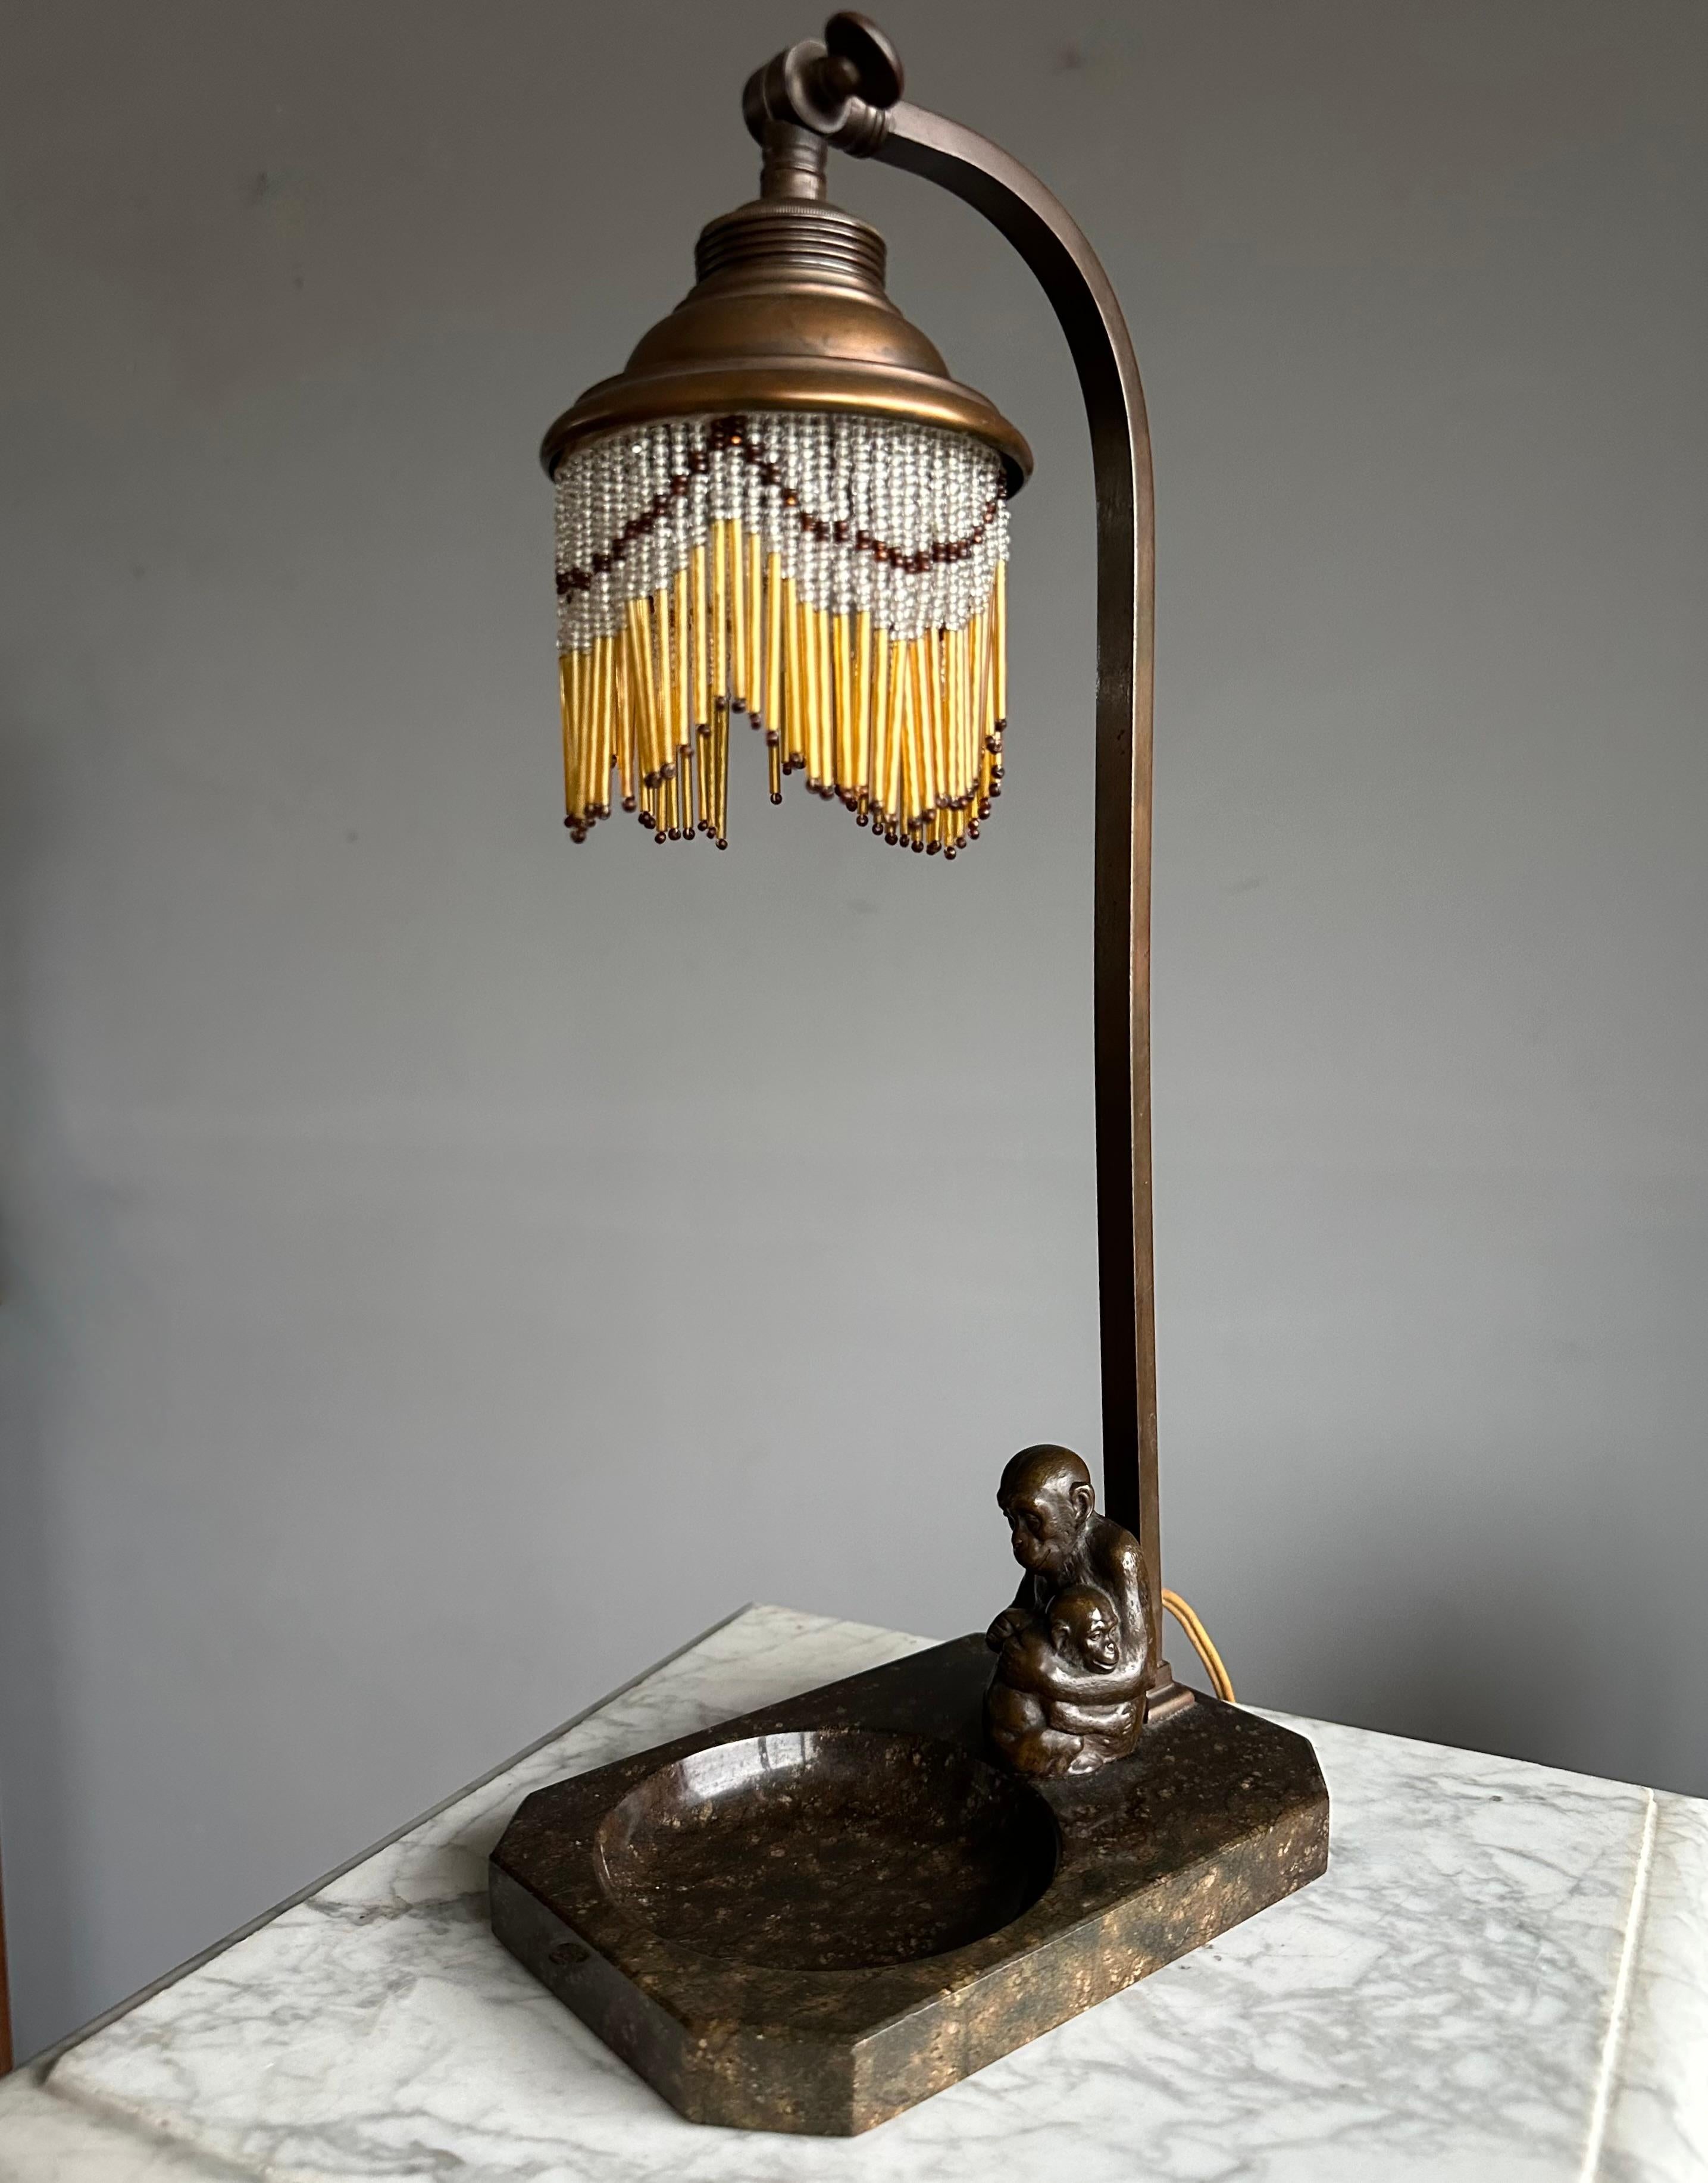 Elegant Jugendstil Bronze and Brass, Table or Desk Lamp with mother and infant chimpanzee sculpture.

We are happy to offer you another one of our recent great finds. This truly wonderful lamp from the German or Austrian Arts & Crafts era comes with